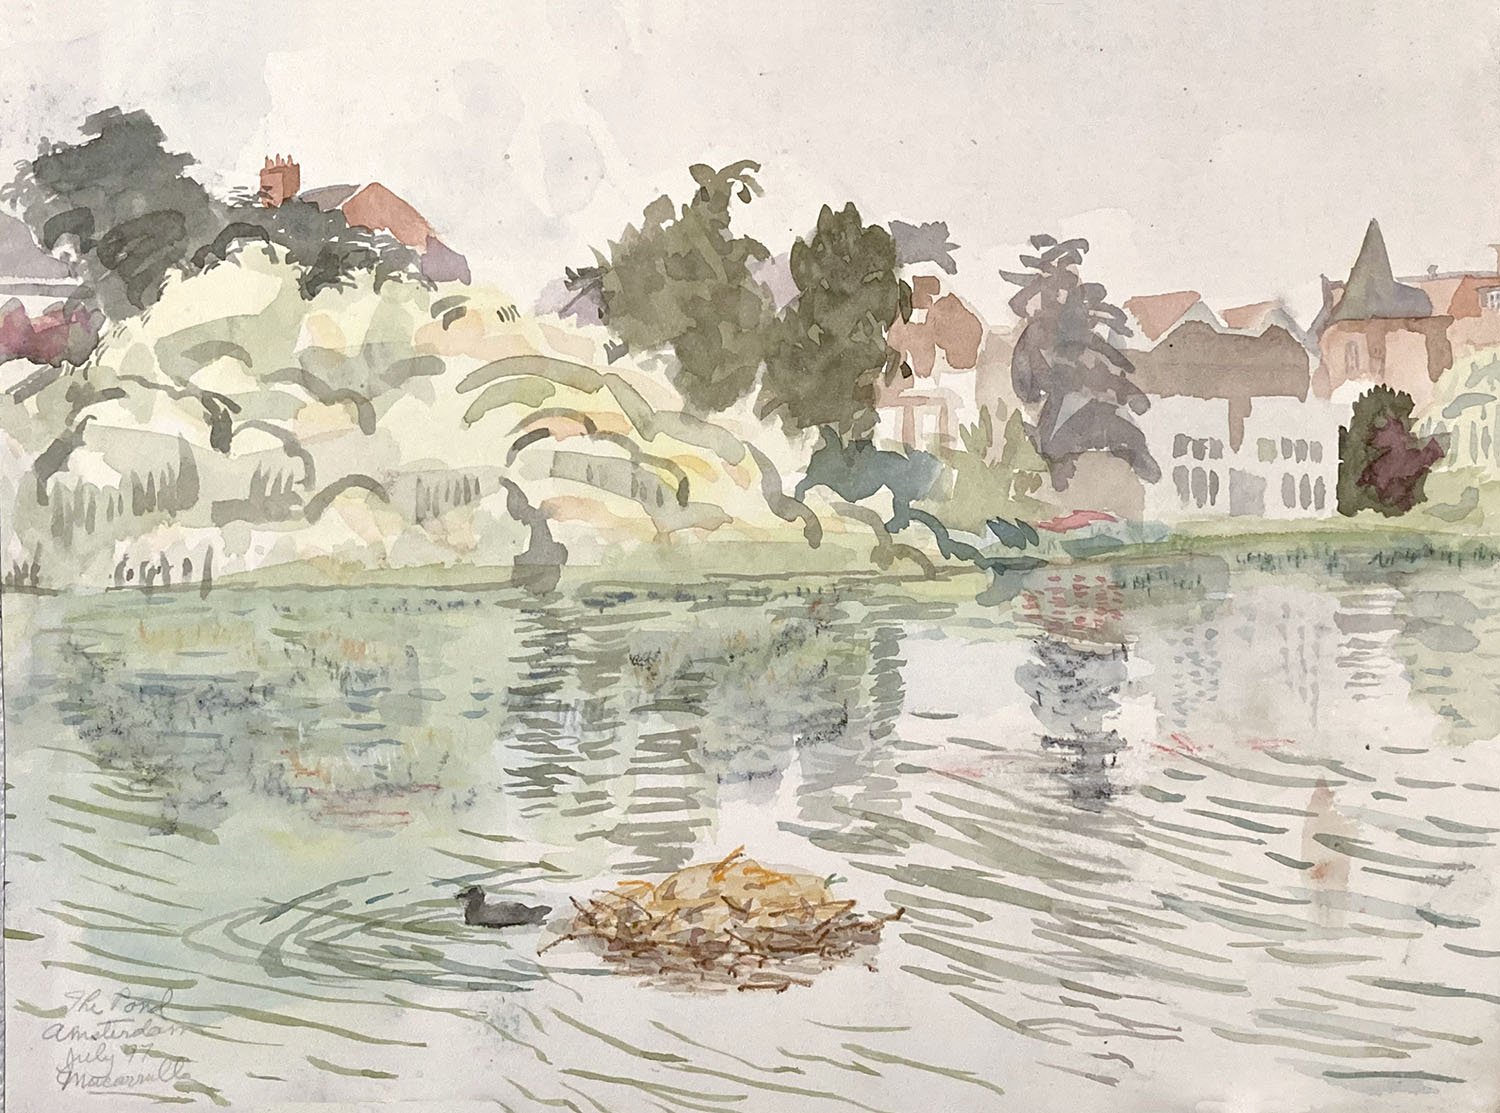    The Pond (Amsterdam),   1997. Watercolor.  